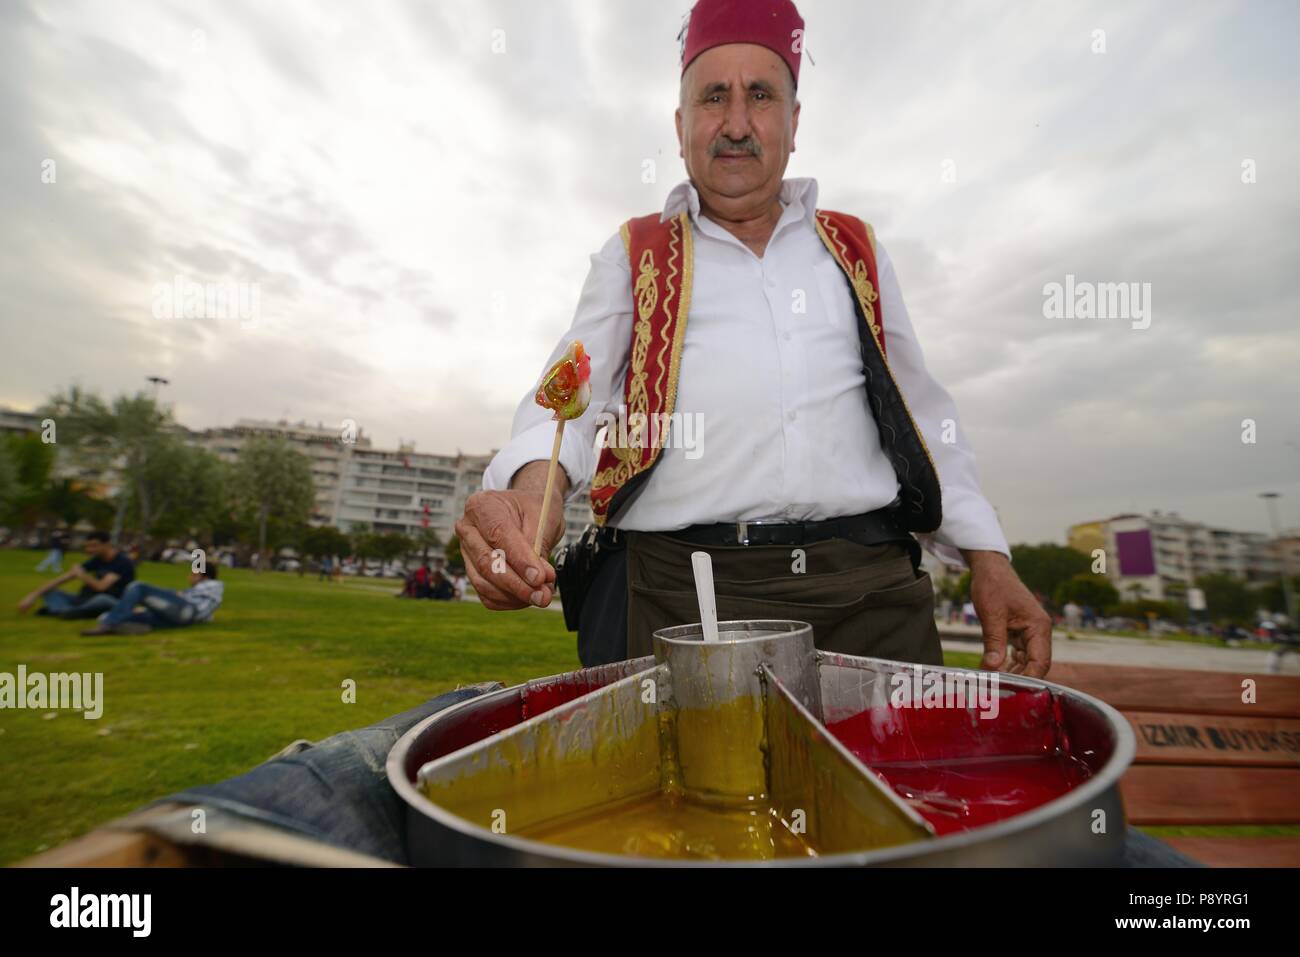 Traditional Ottoman man selling street food, candy selling man Stock Photo